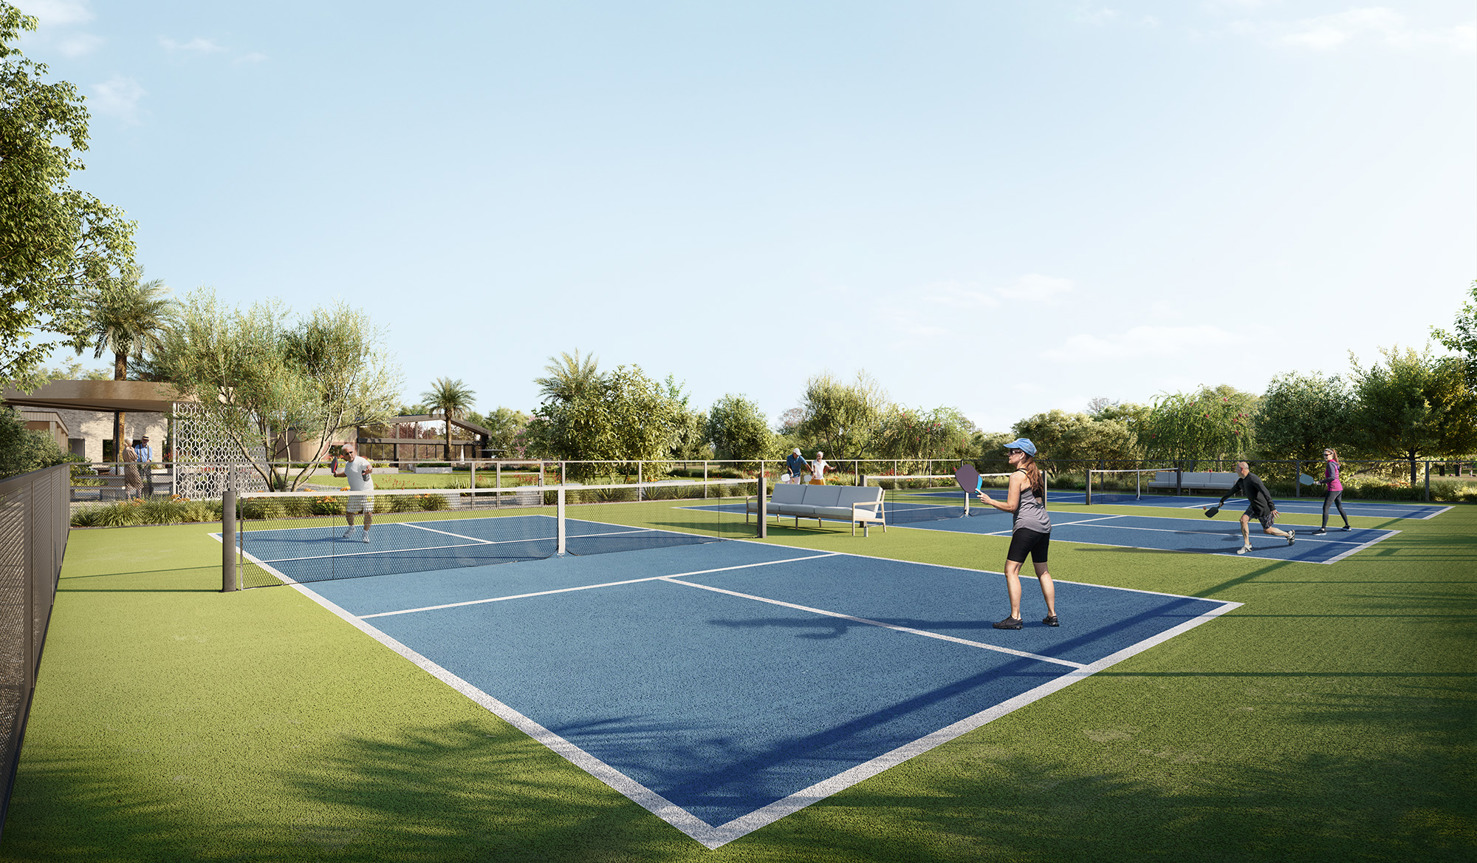 Render of the Halcyon Jardin pickleball courts